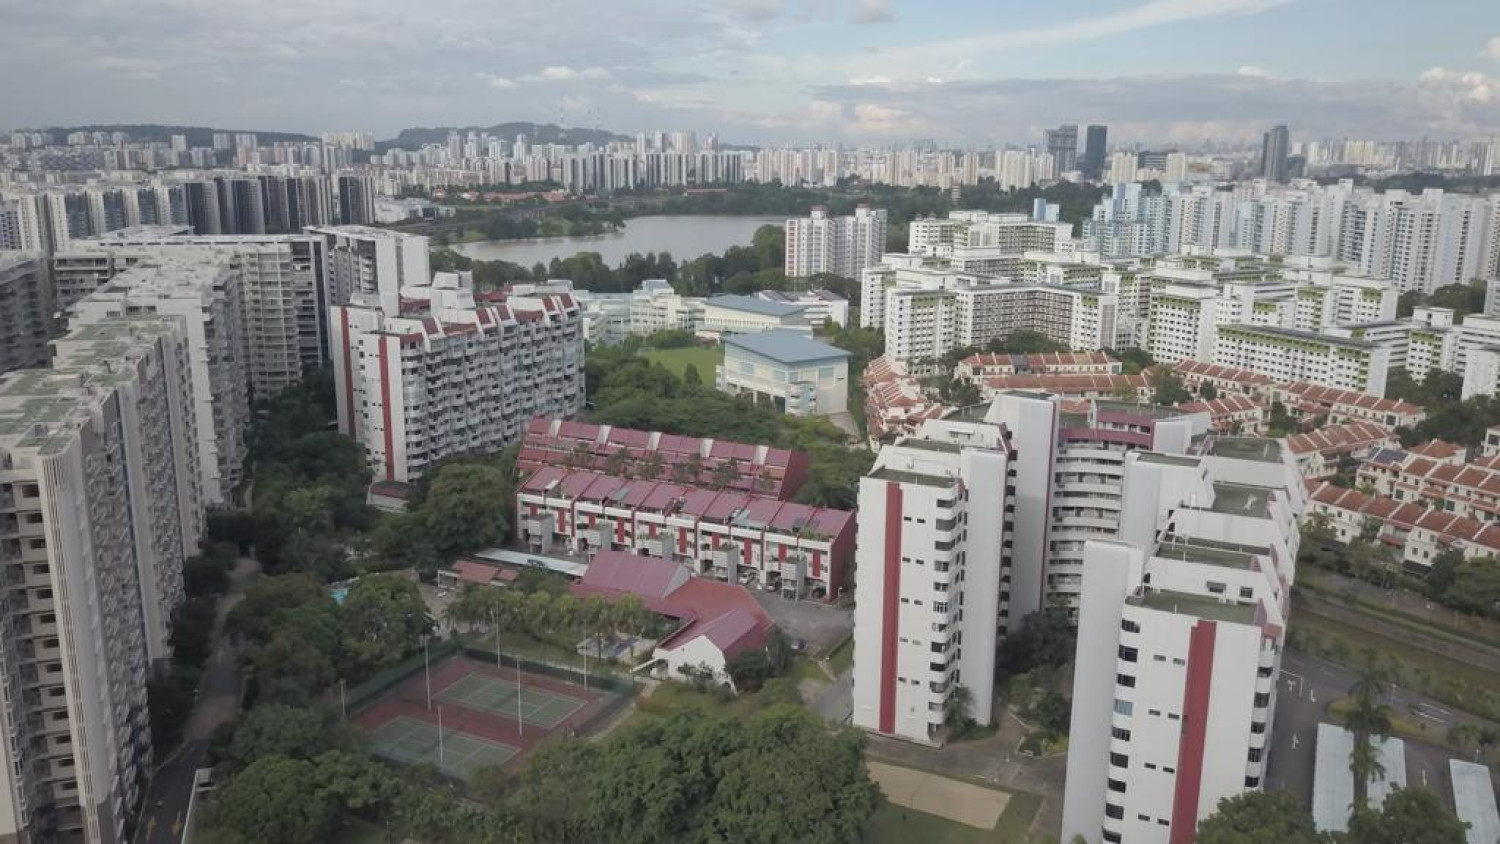 Lakepoint in Jurong launches collective sale bid - Property News